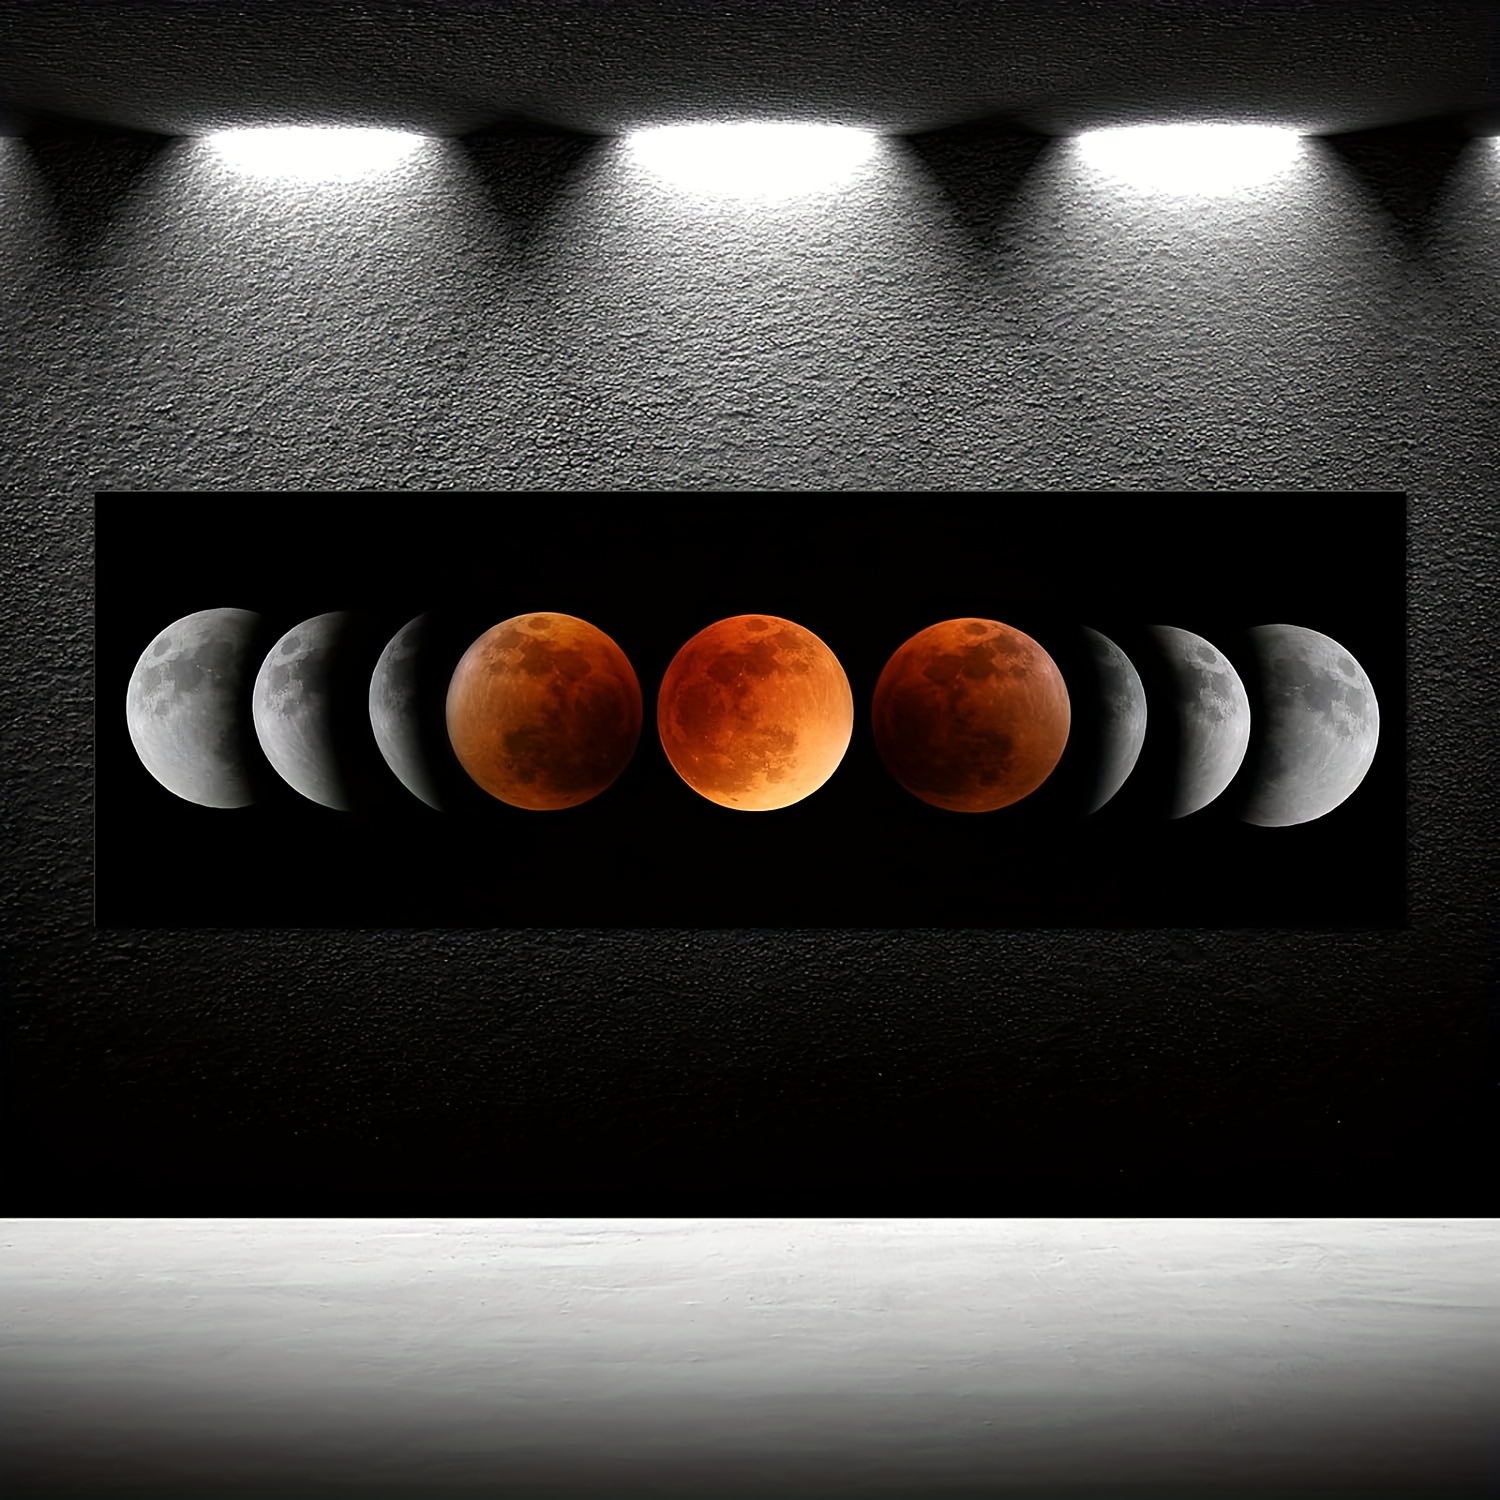 

Great Eclipse Moon Wall Decoration Black And White Canvas Print Artwork Moon Wall Art Abstract Print Poster Office Dorm Living Room Bedroom Home Decor (20 "x40") Without Frame